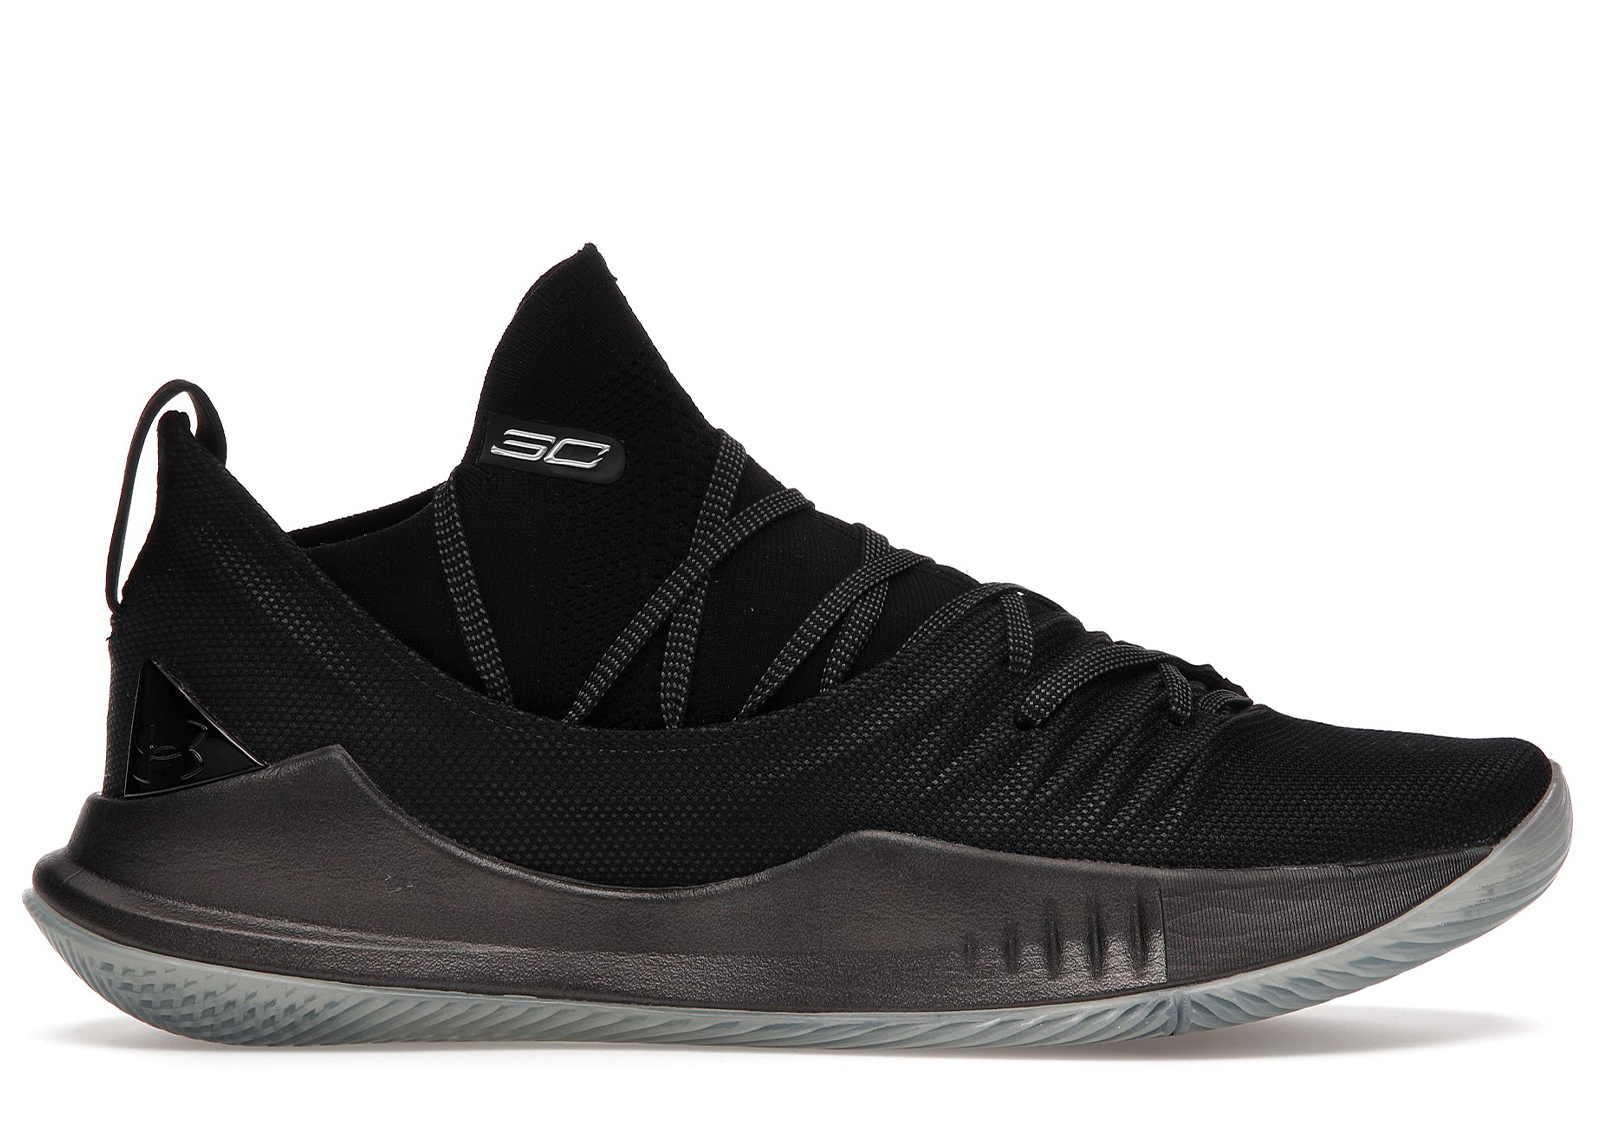 Under Armour Curry 5 Pi Day メンズ - 3020657-002 - JP